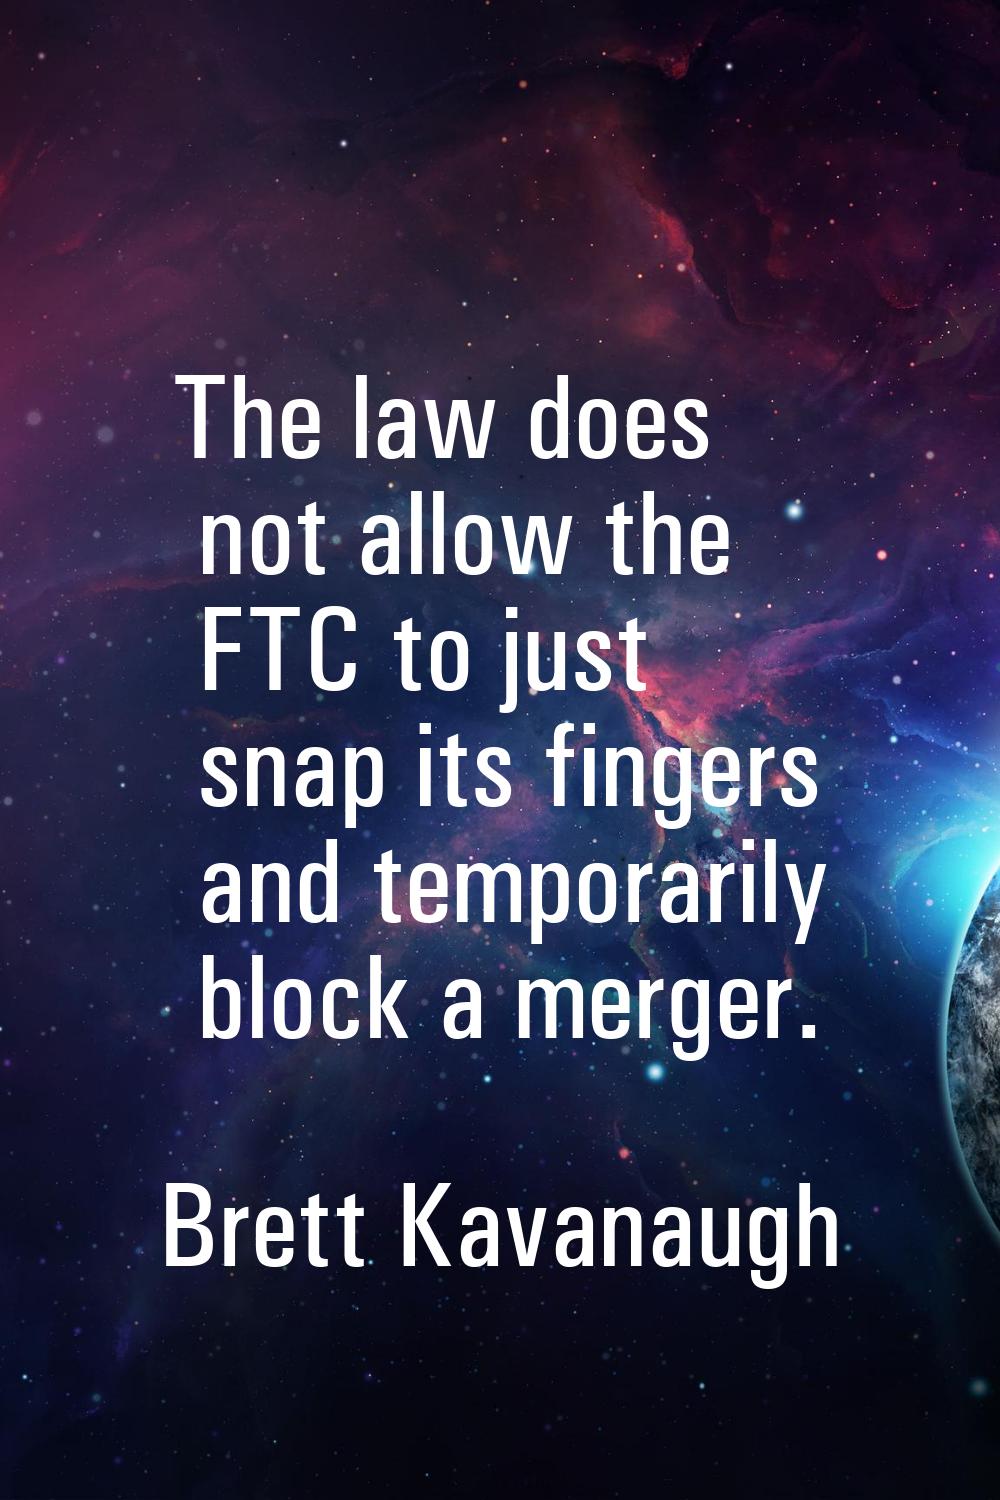 The law does not allow the FTC to just snap its fingers and temporarily block a merger.